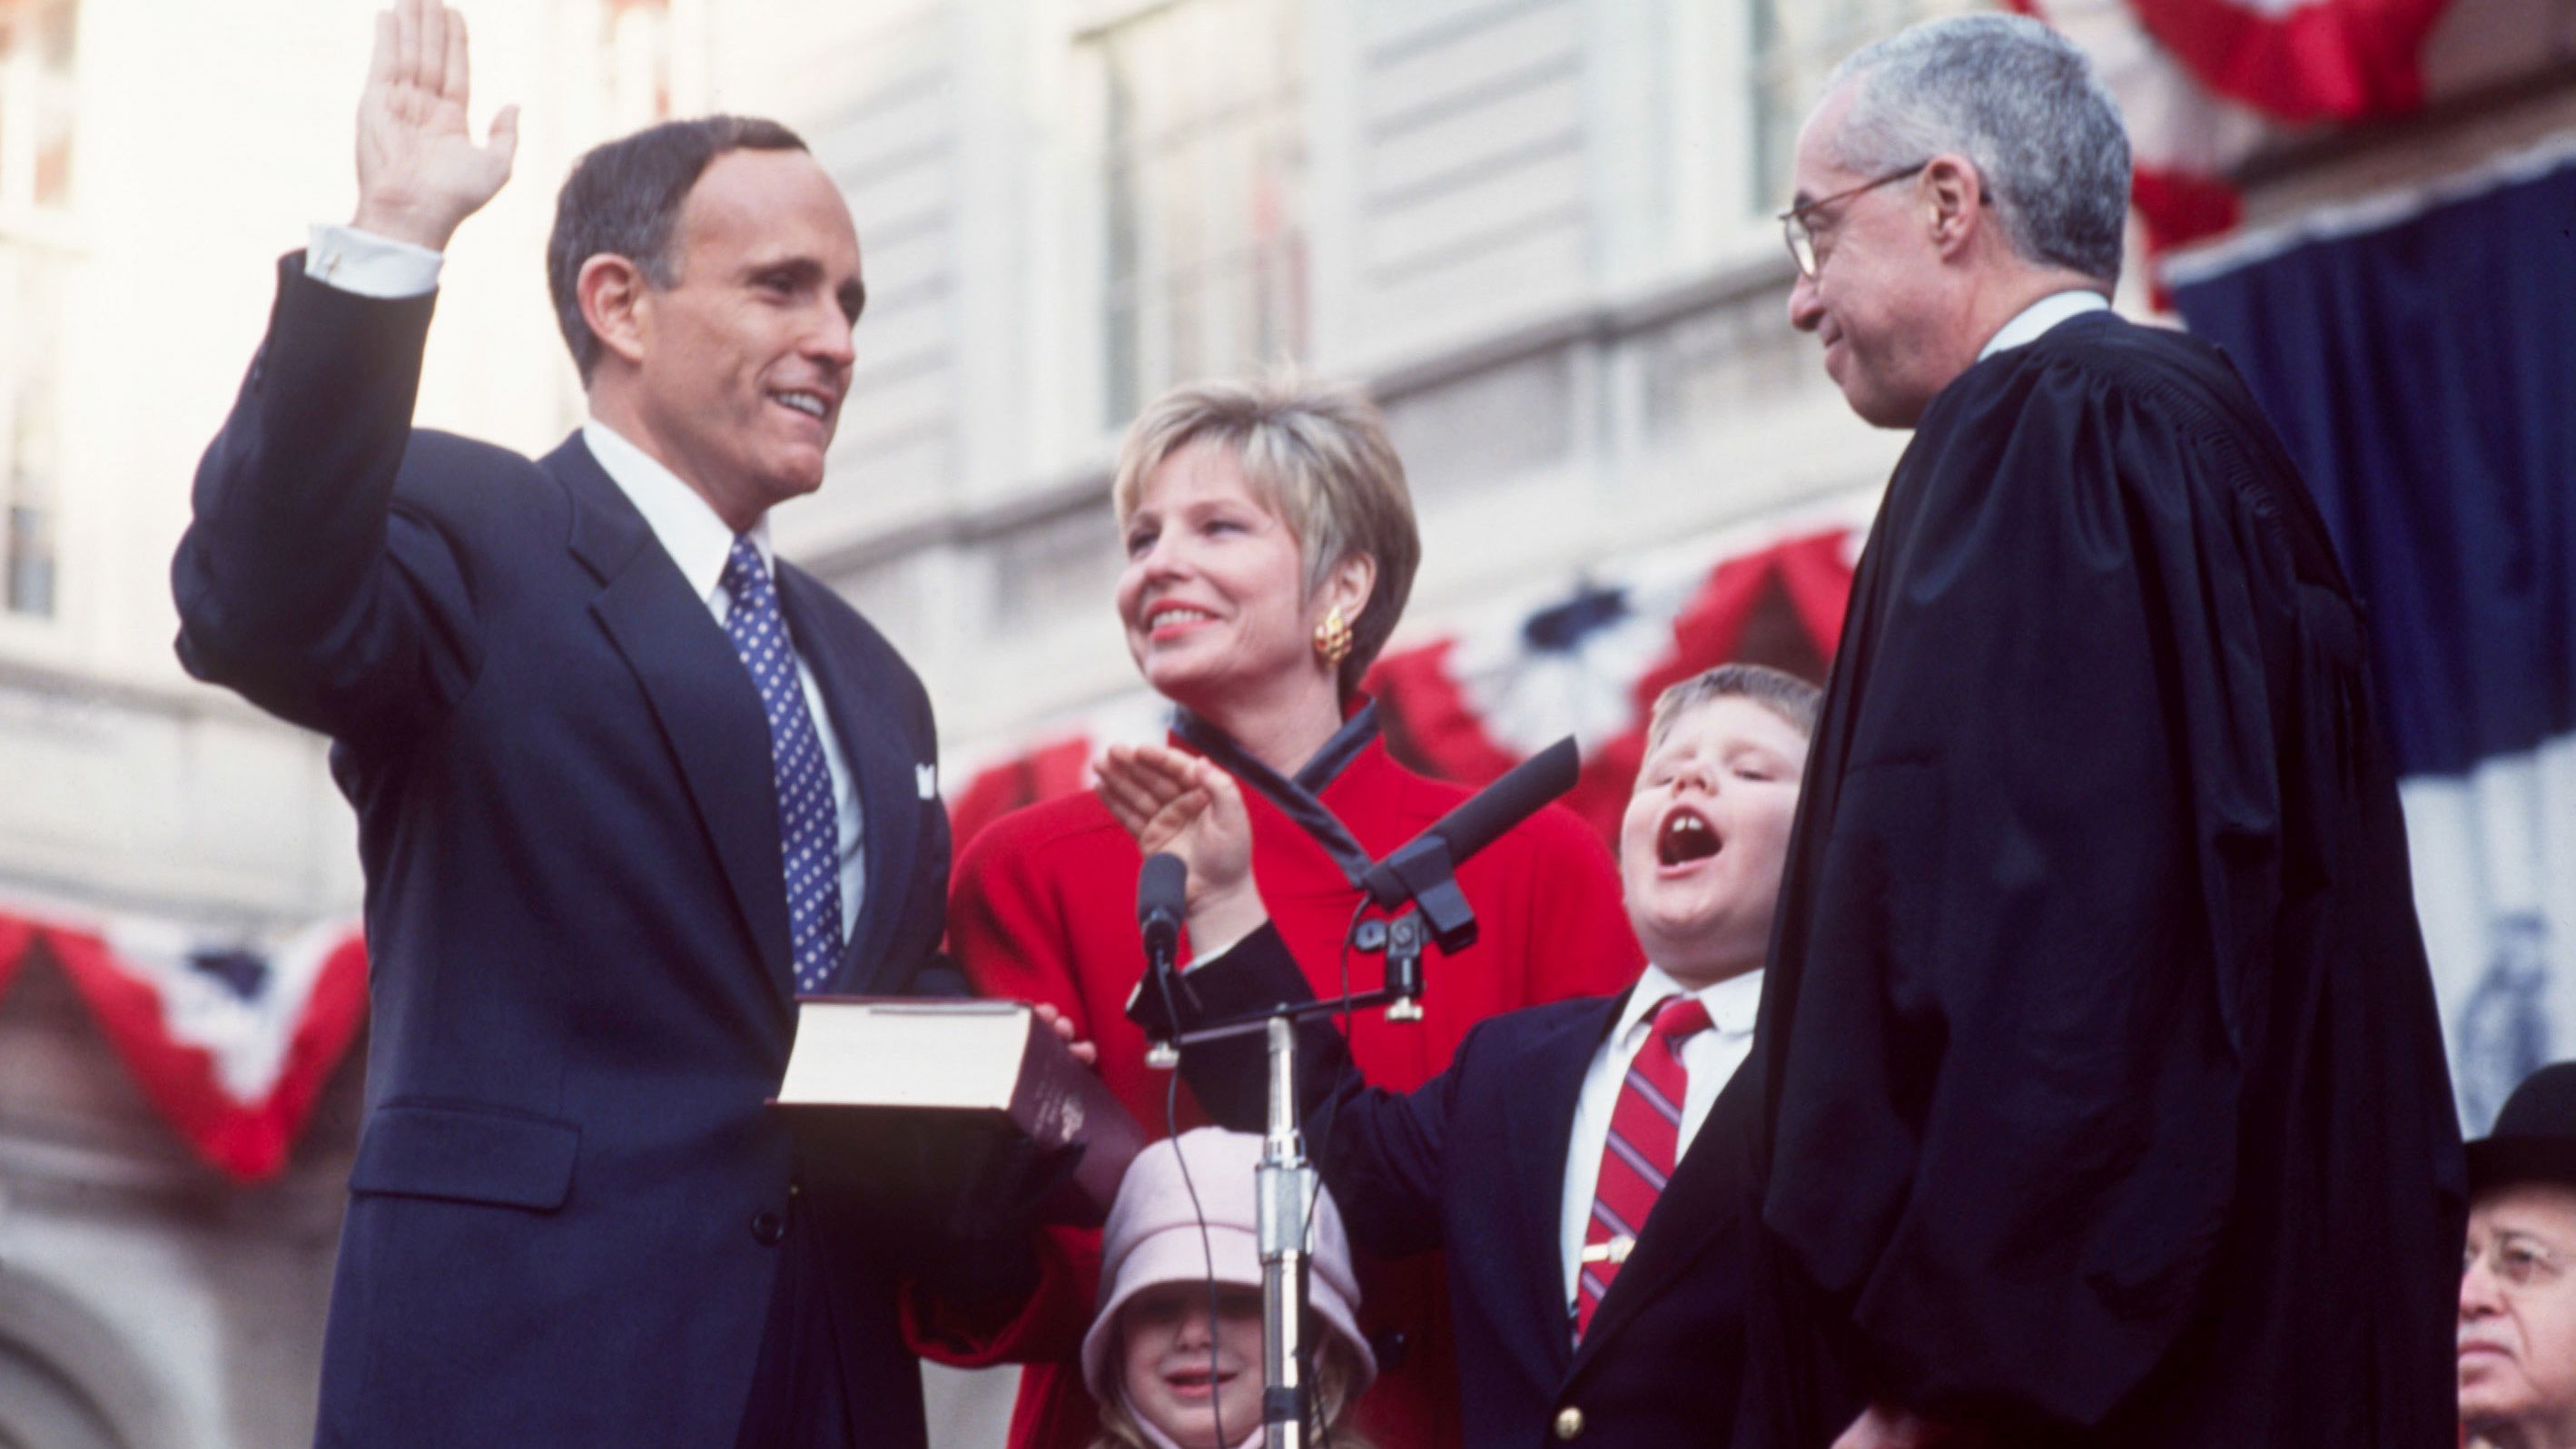 Giuliani is sworn in as New York City's mayor in January 1994. Joining him are his wife, Donna, and their children, Andrew and Caroline.